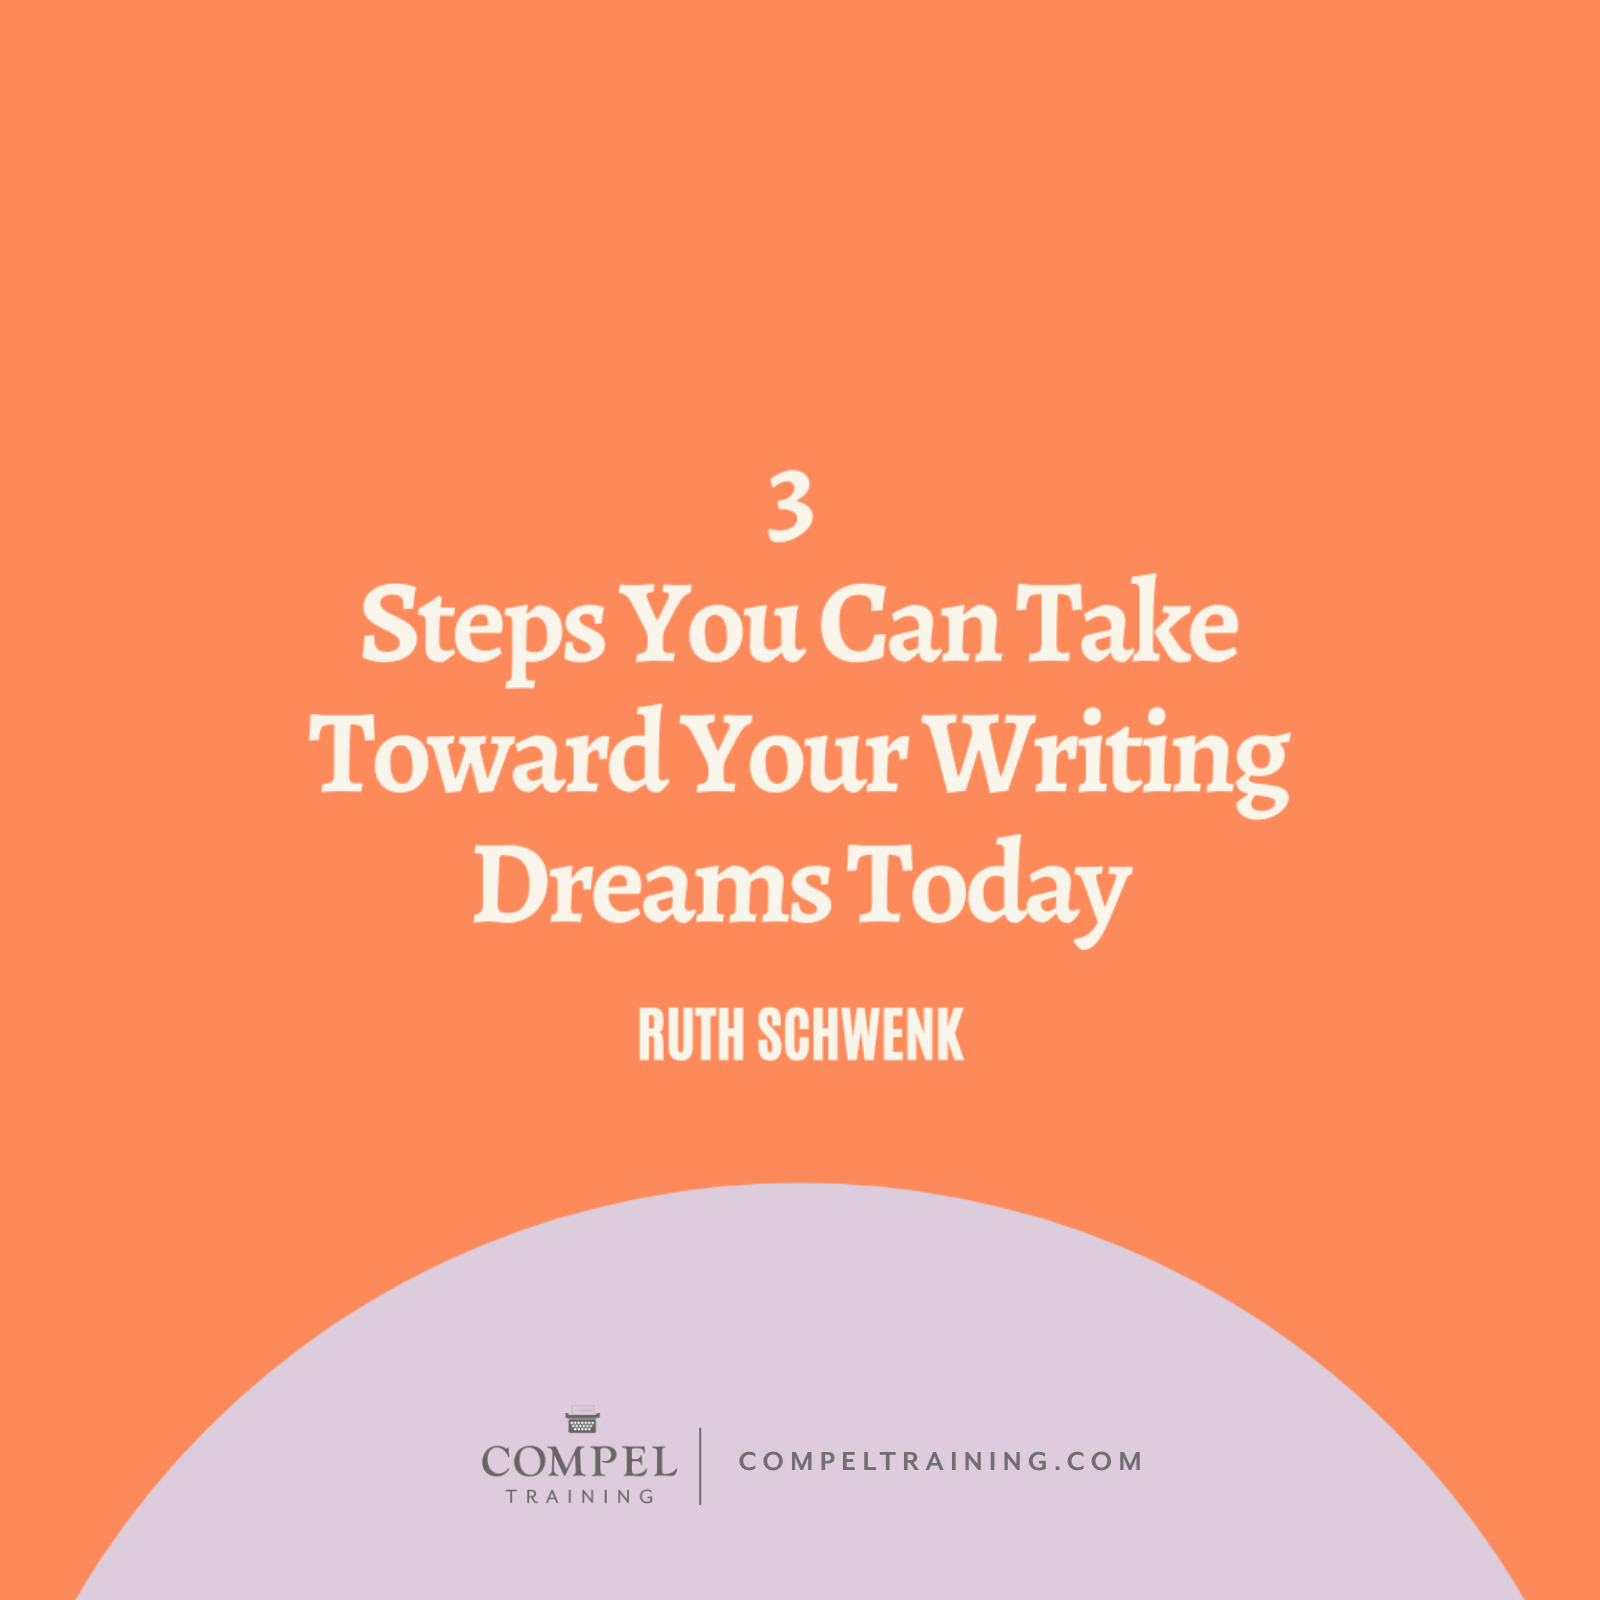 Are you struggling to start writing because you feel unqualified or ill-equipped? I’ve been there. Even those of us who have published books or popular blogs often struggle with not feeling like a writer. Today, I want to encourage you and give you some tips for how to push past those insecurities and start making progress in your writing dreams and aspirations.